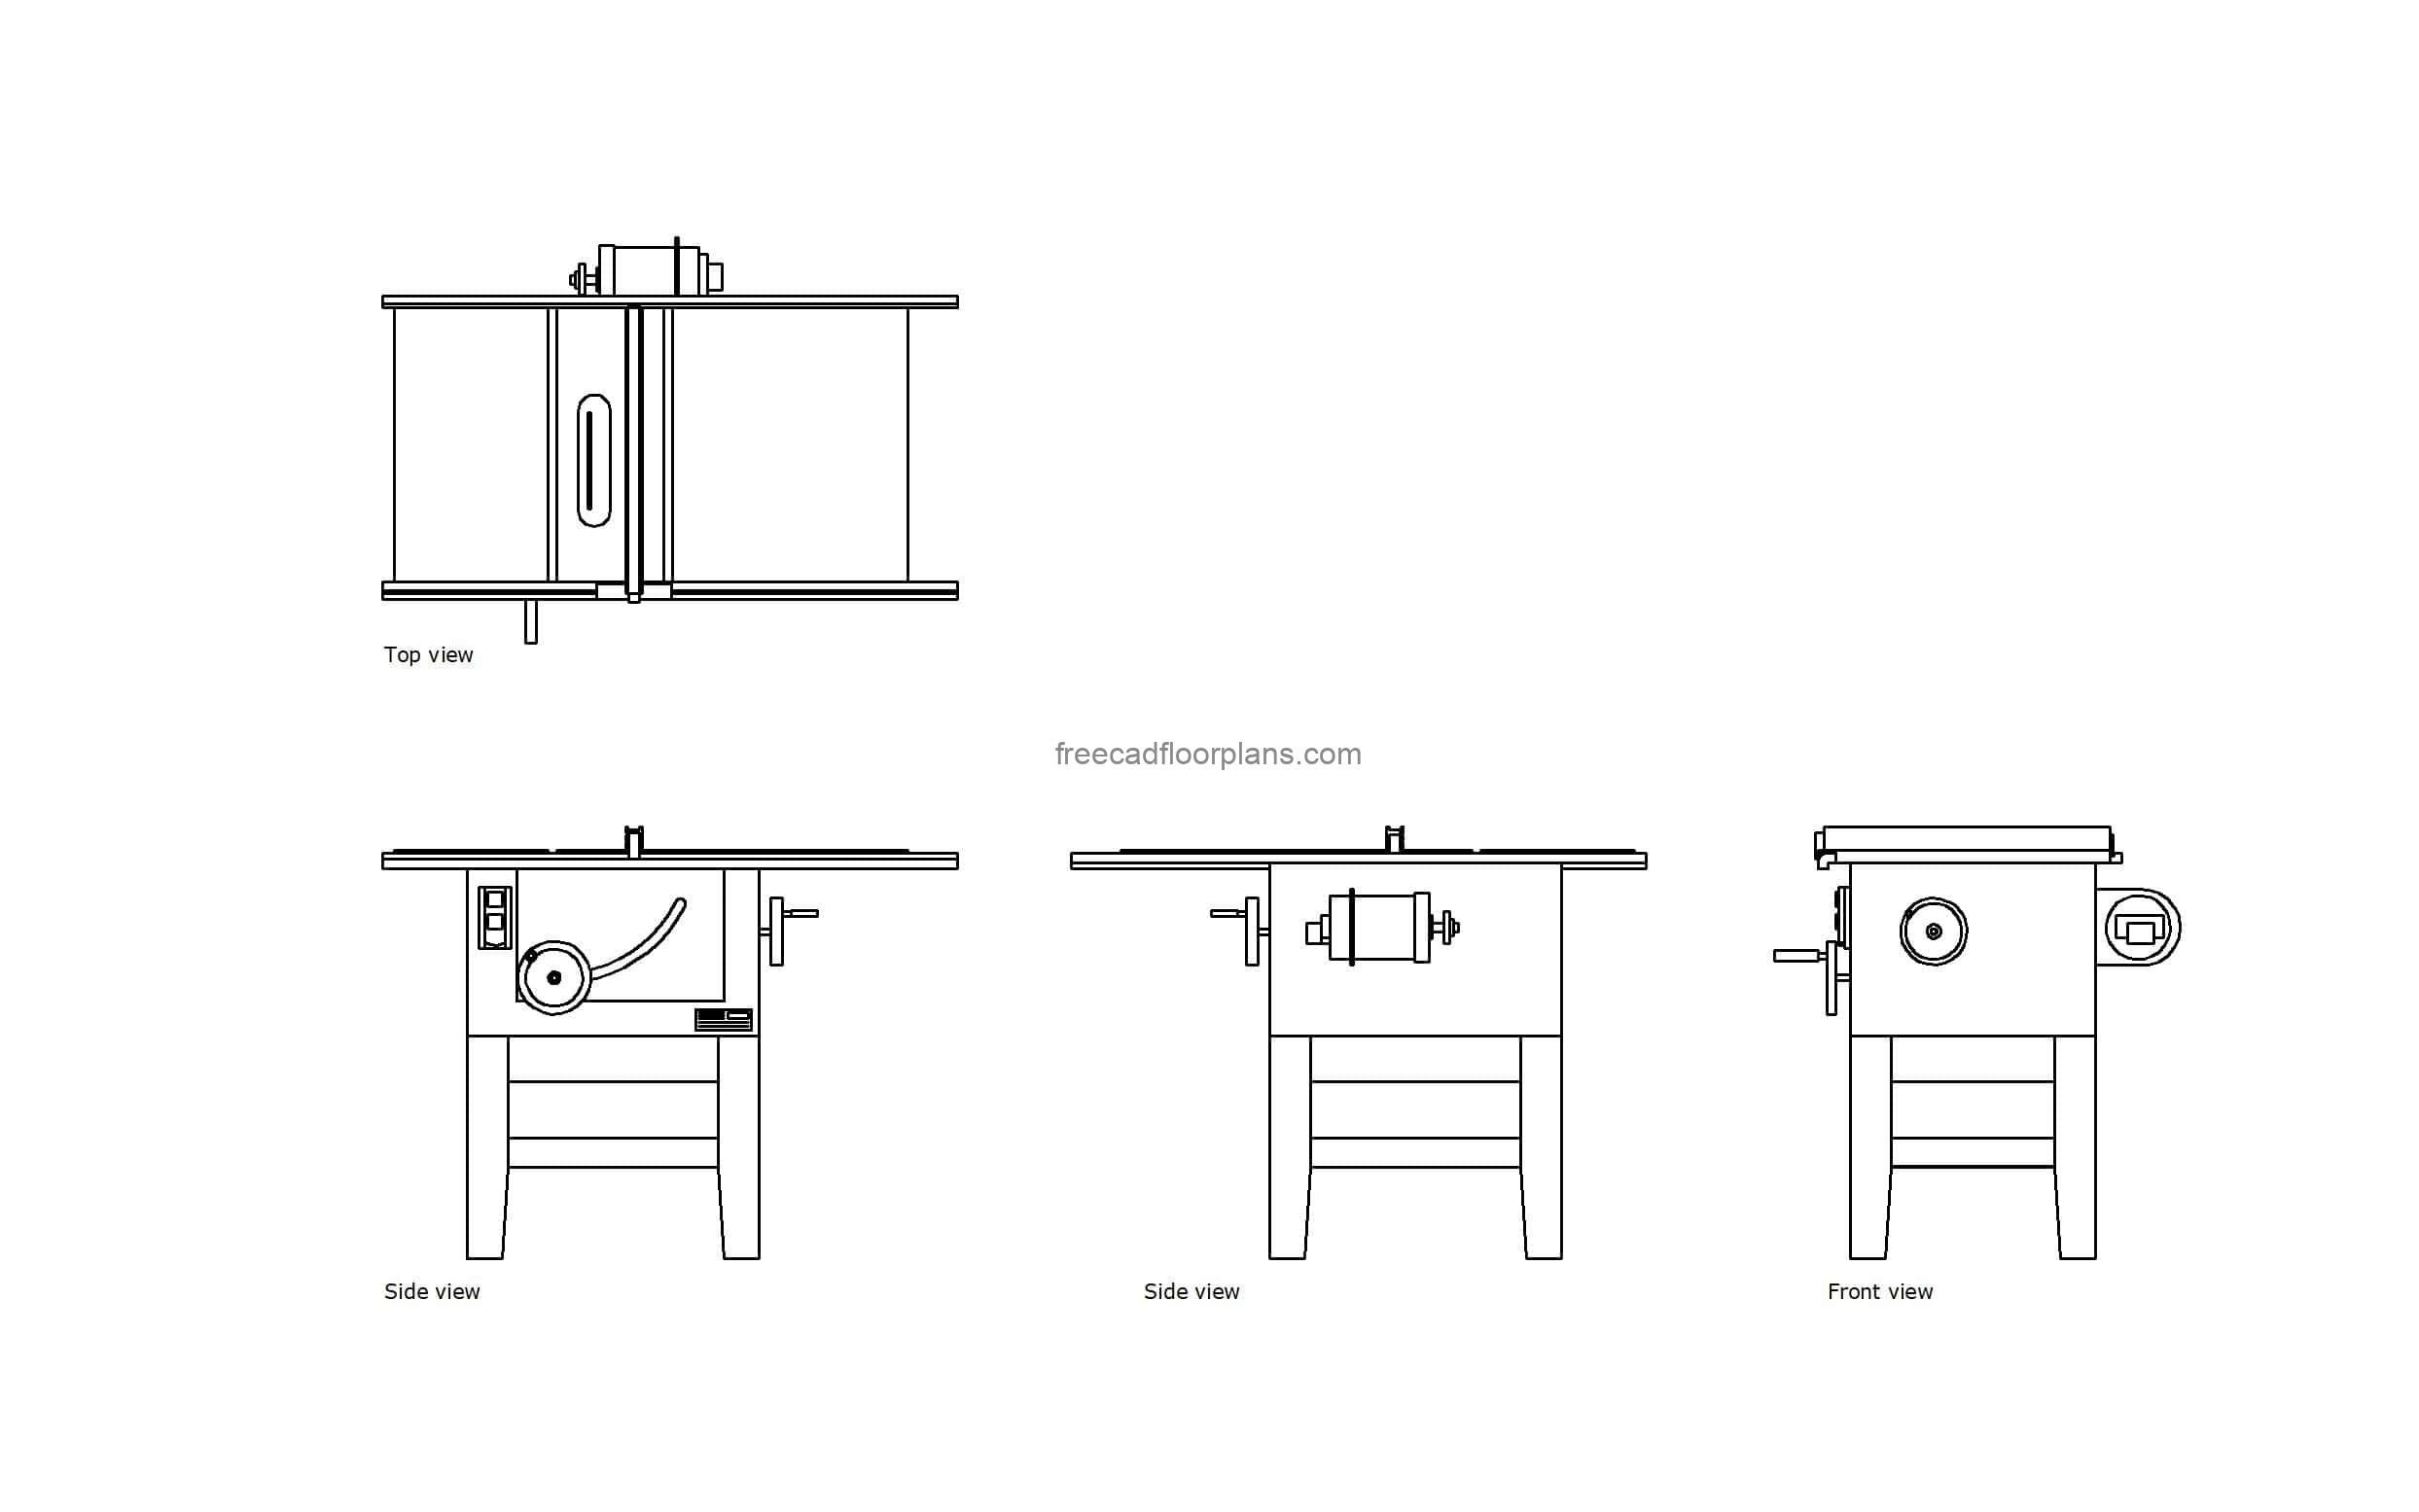 autocad drawing of a table saw, plan and elevation 2d views, dwg file free for download